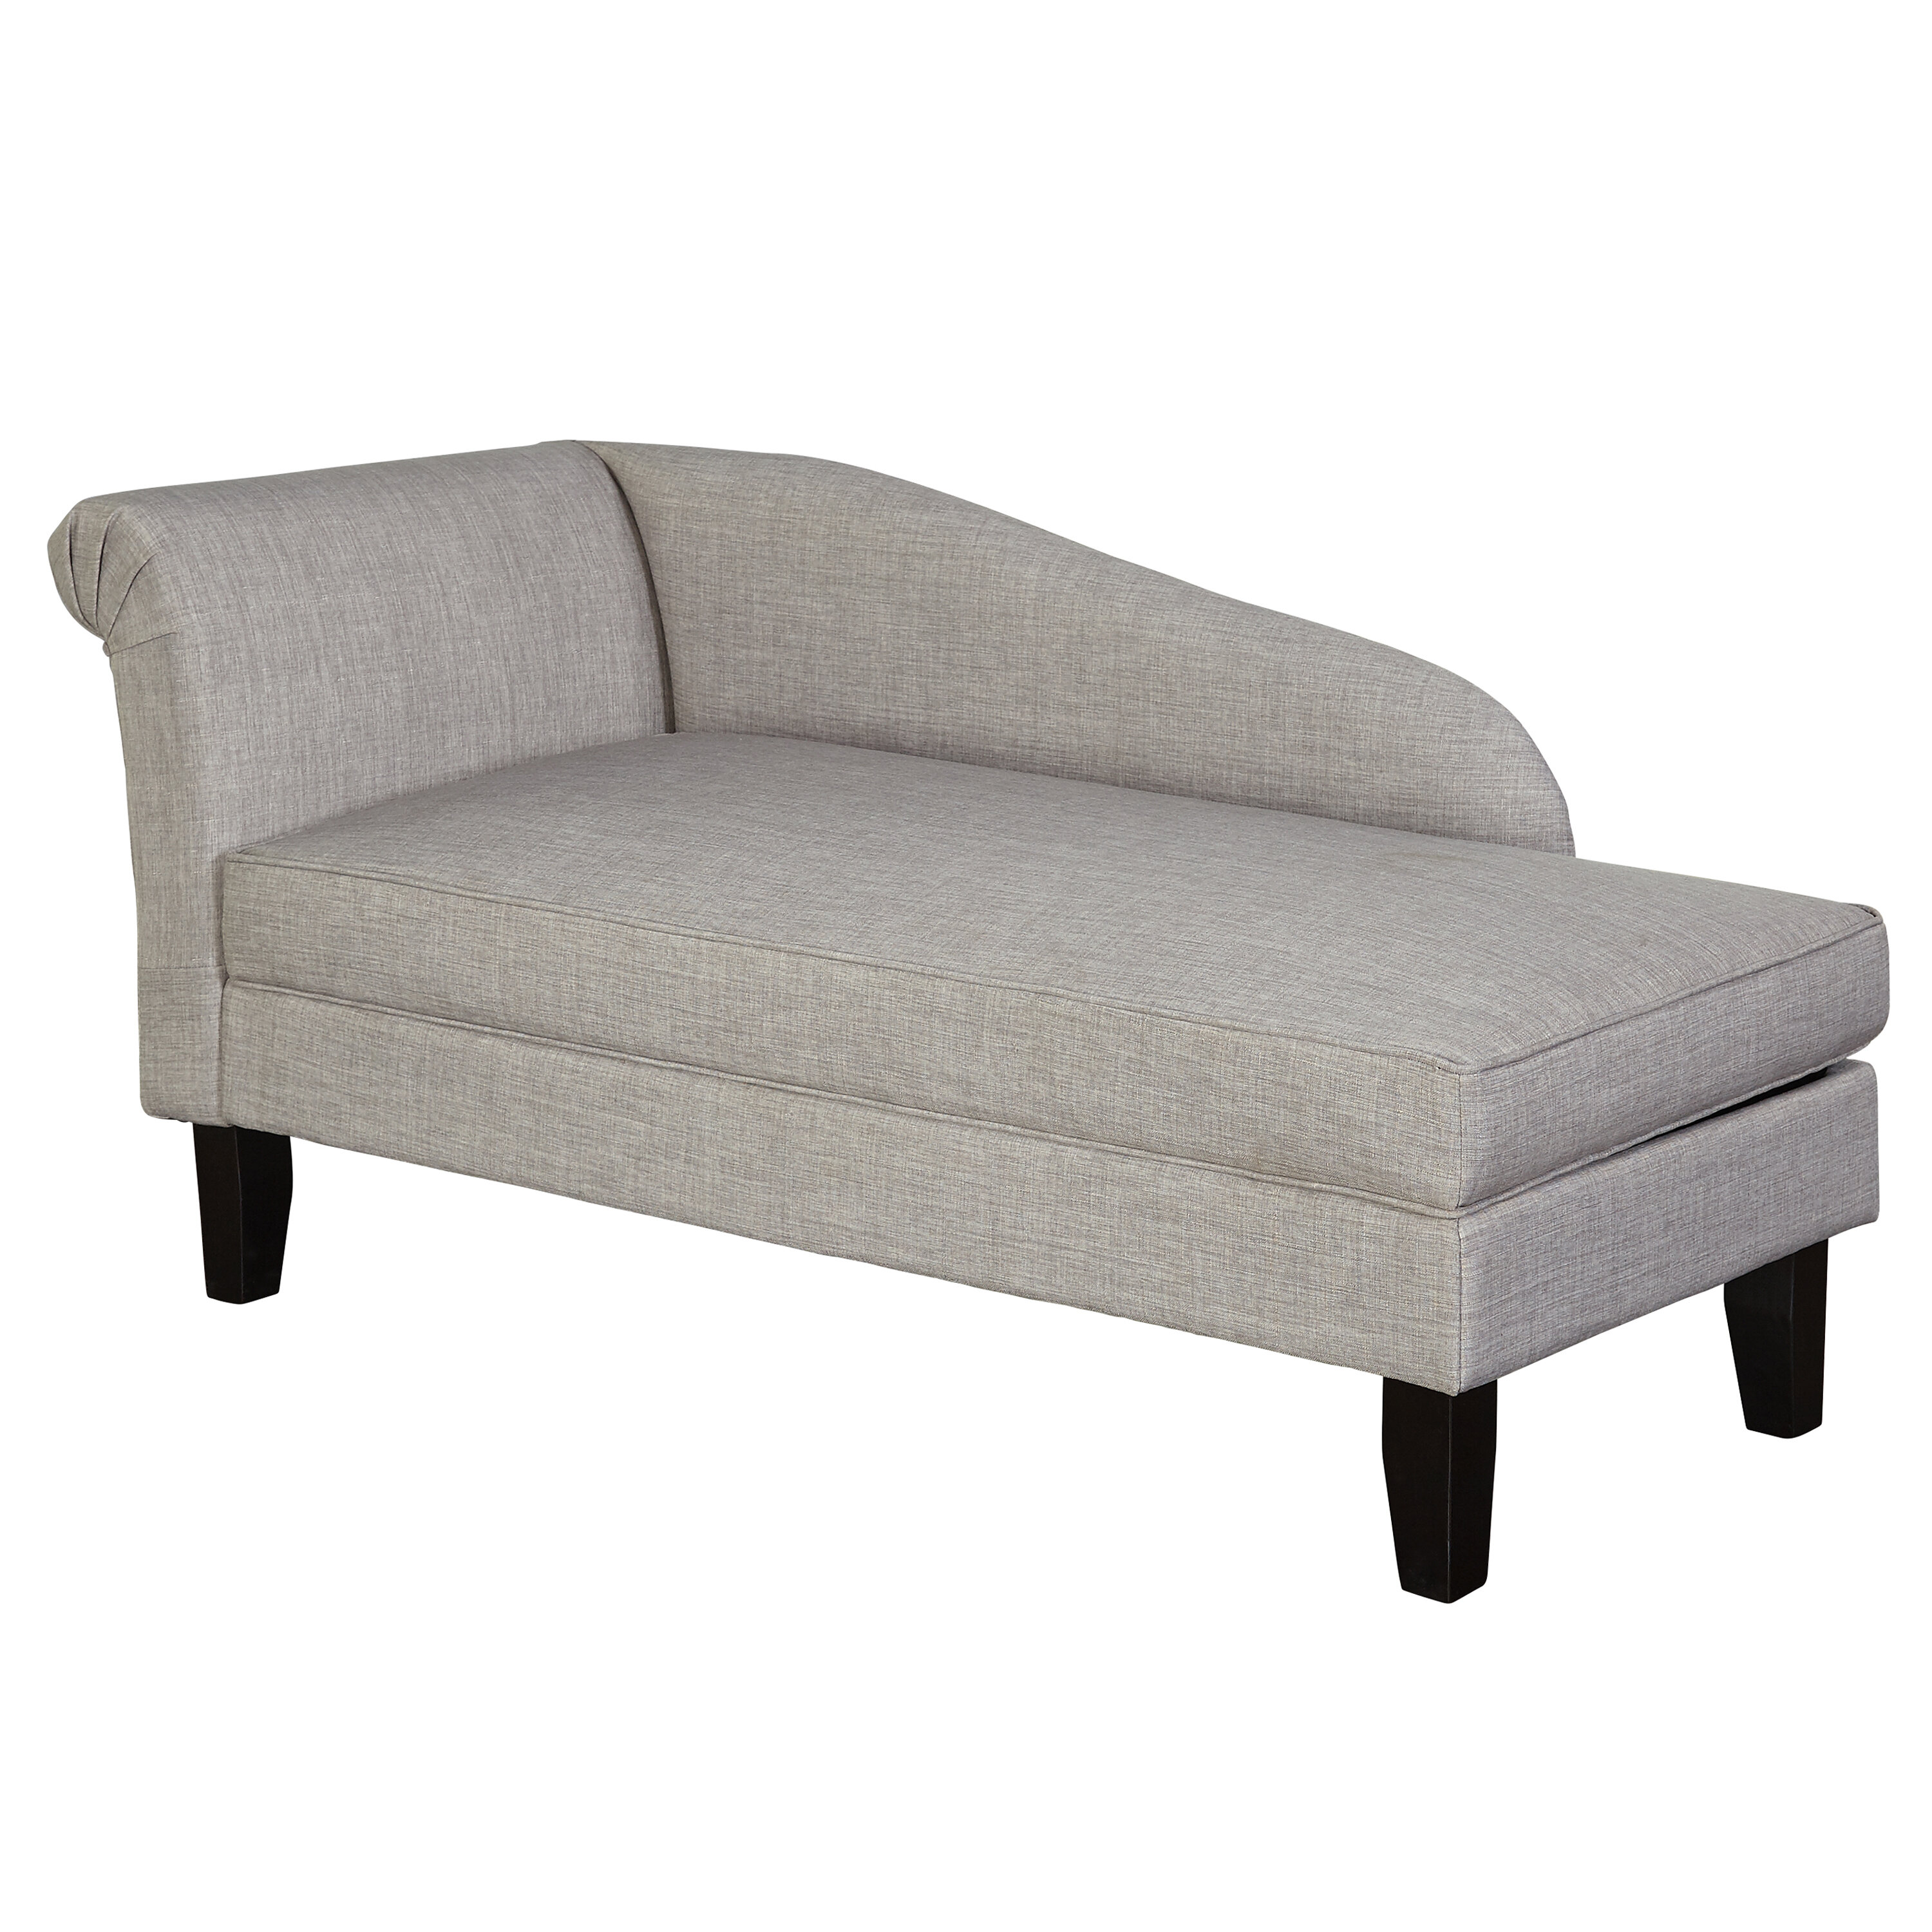 Three Posts Middletown Chaise Lounge Reviews Wayfair